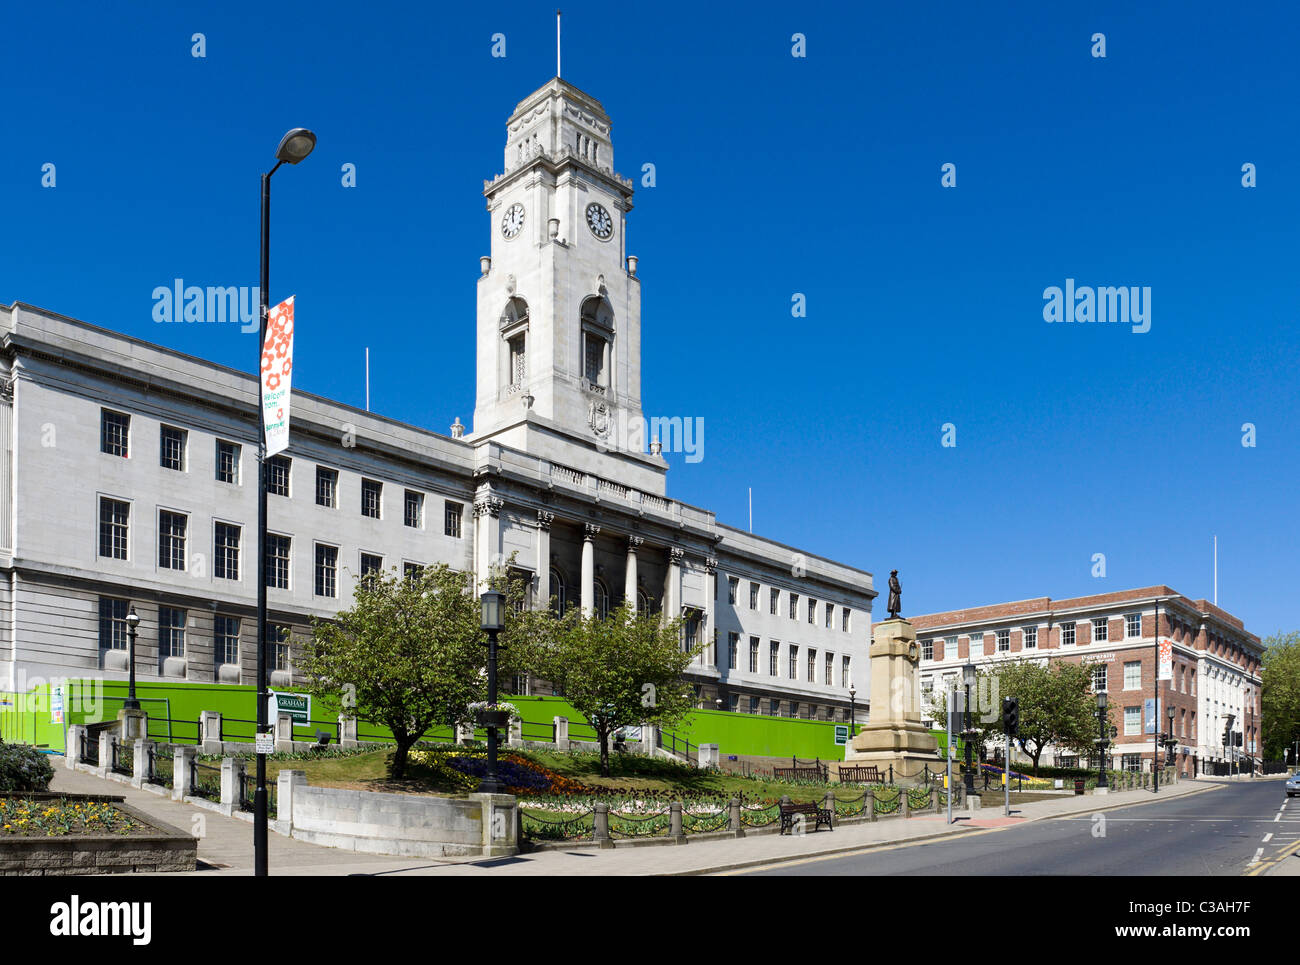 The Town Hall on Lancaster Gate in the town centre, Barnsley, West Yorkshire, UK Stock Photo